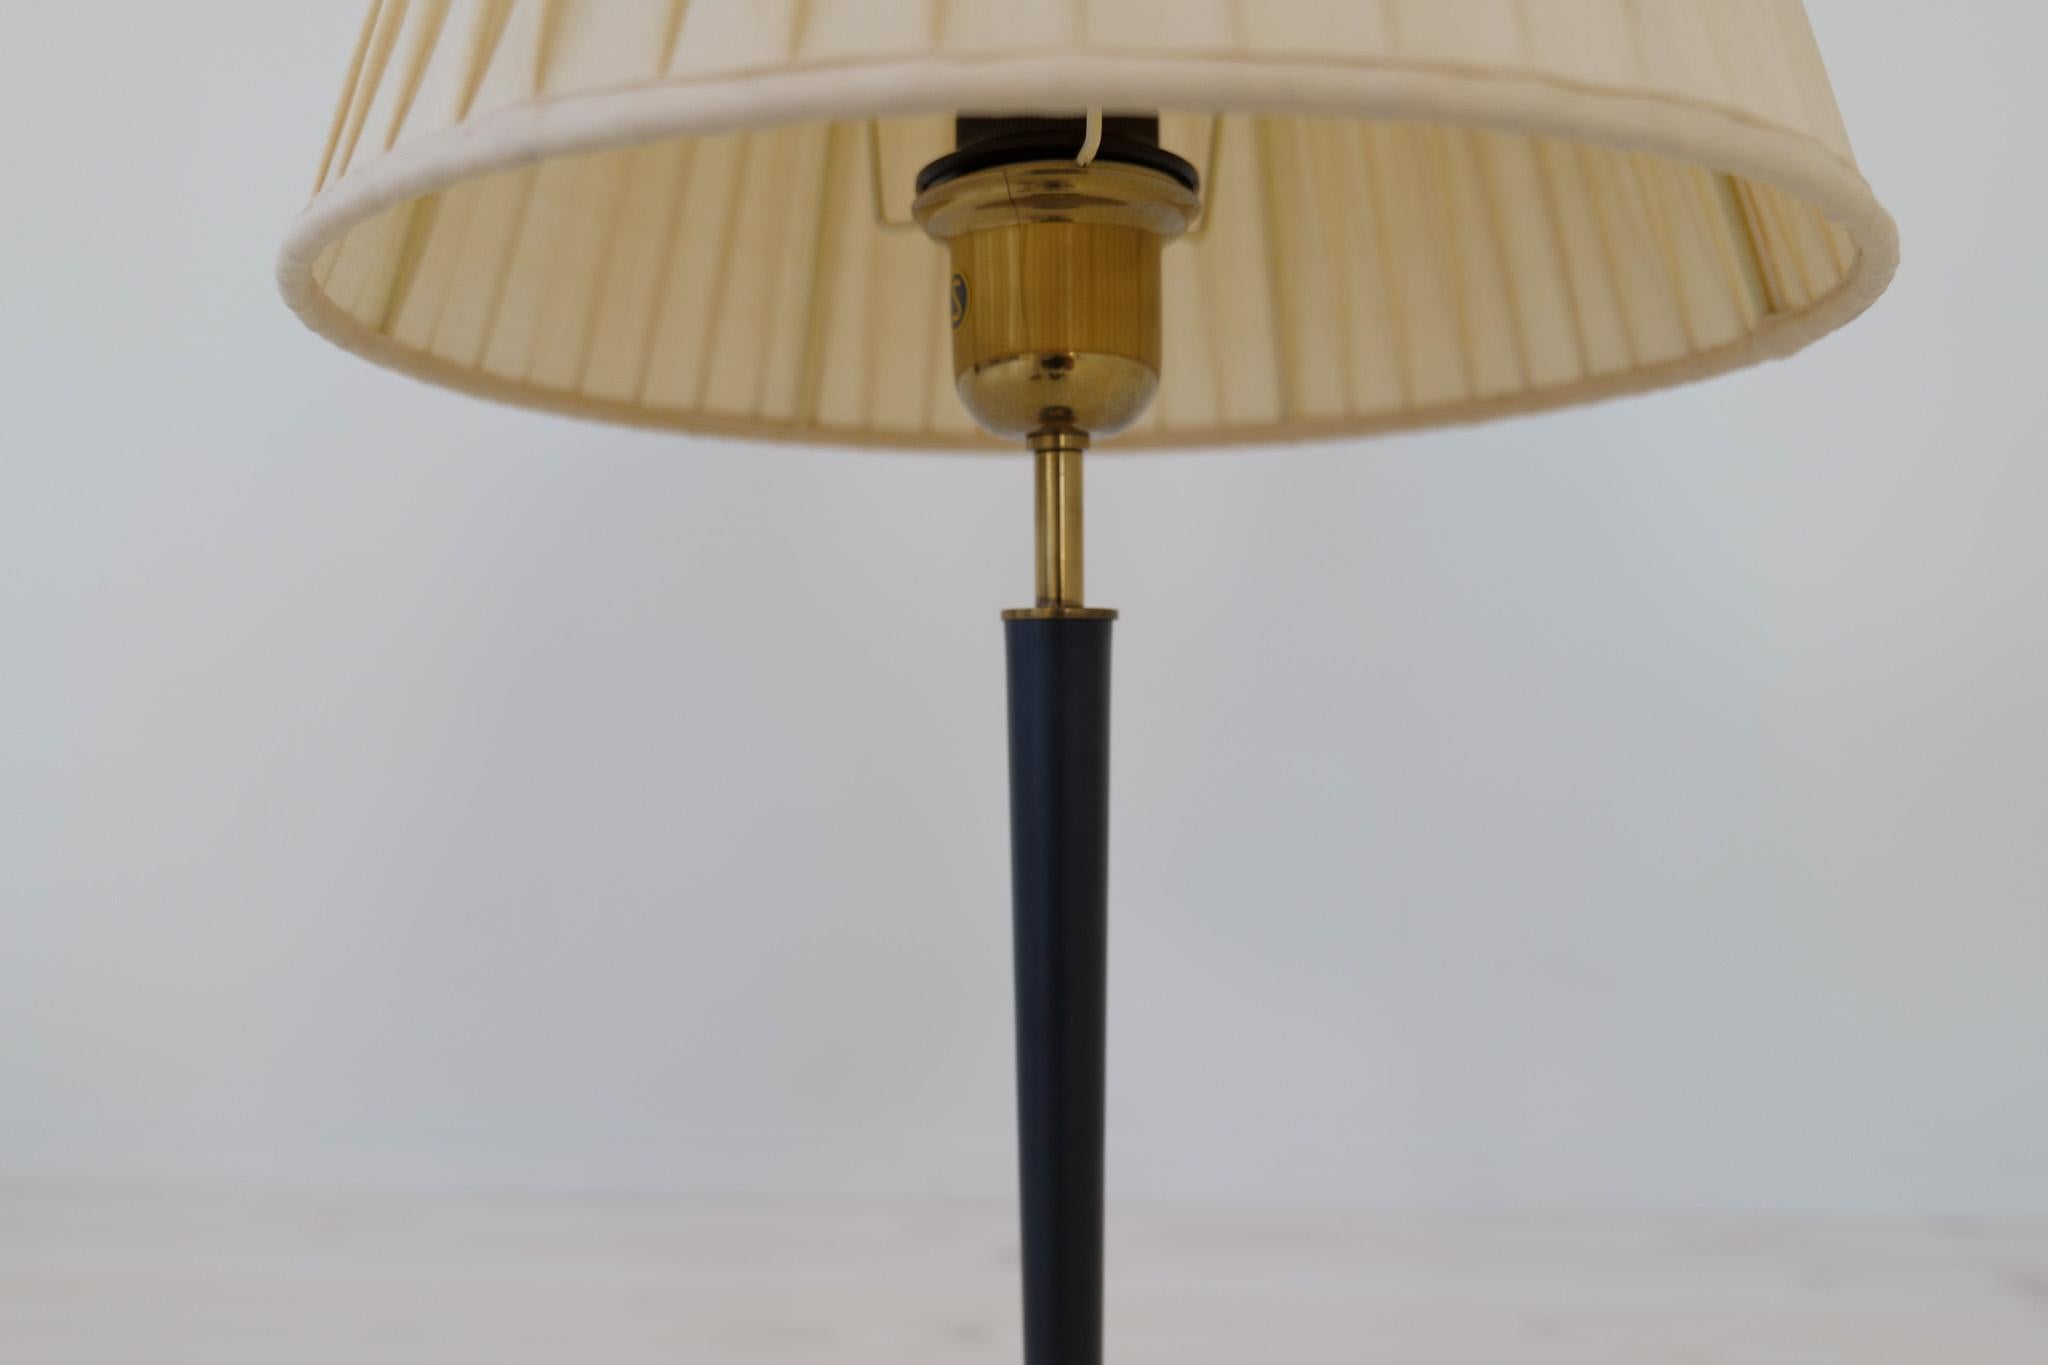 Midcentury Modern Table Lamp in Brass and Cast Iron Asea Sweden, 1950s For Sale 5